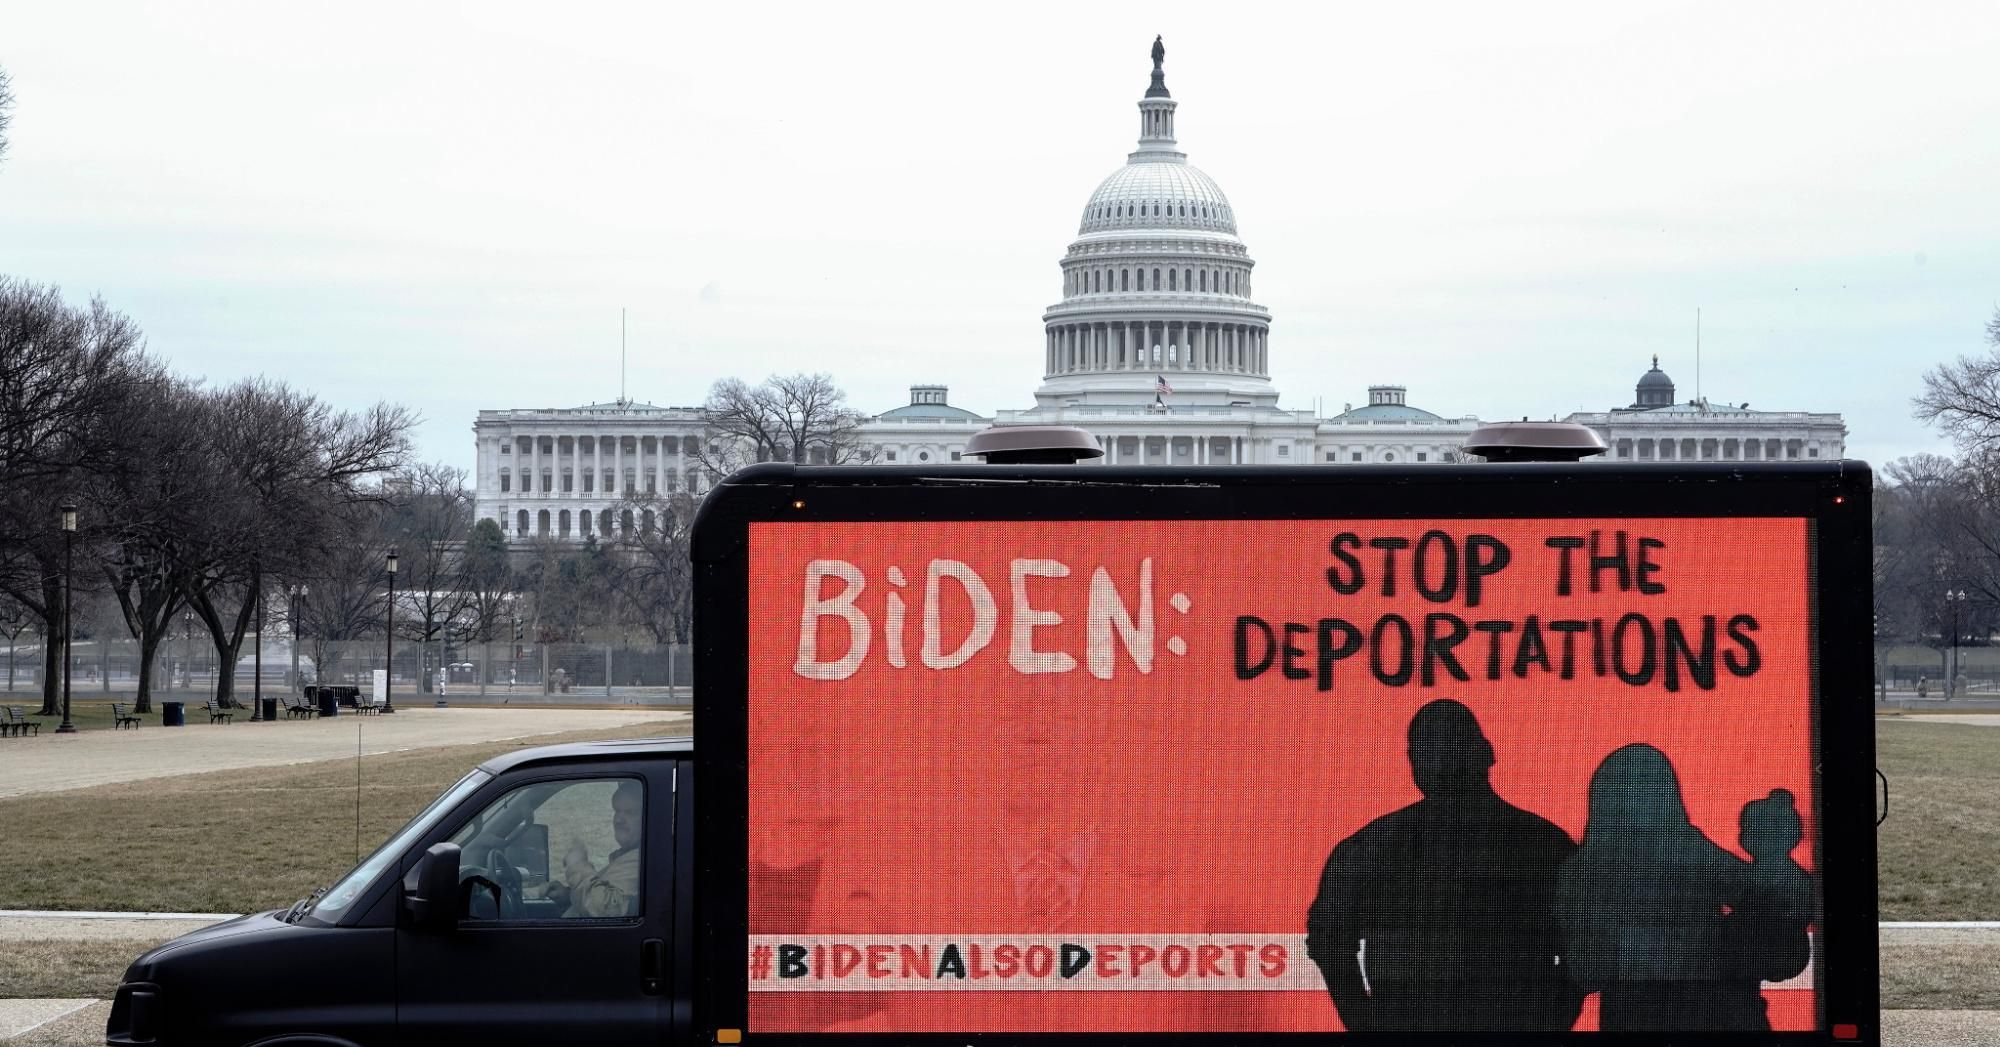 An LED truck displaying messages denouncing mass deportations of immigrants drives past the U.S. Capitol Building on February 15, 2021 in Washington, D.C.